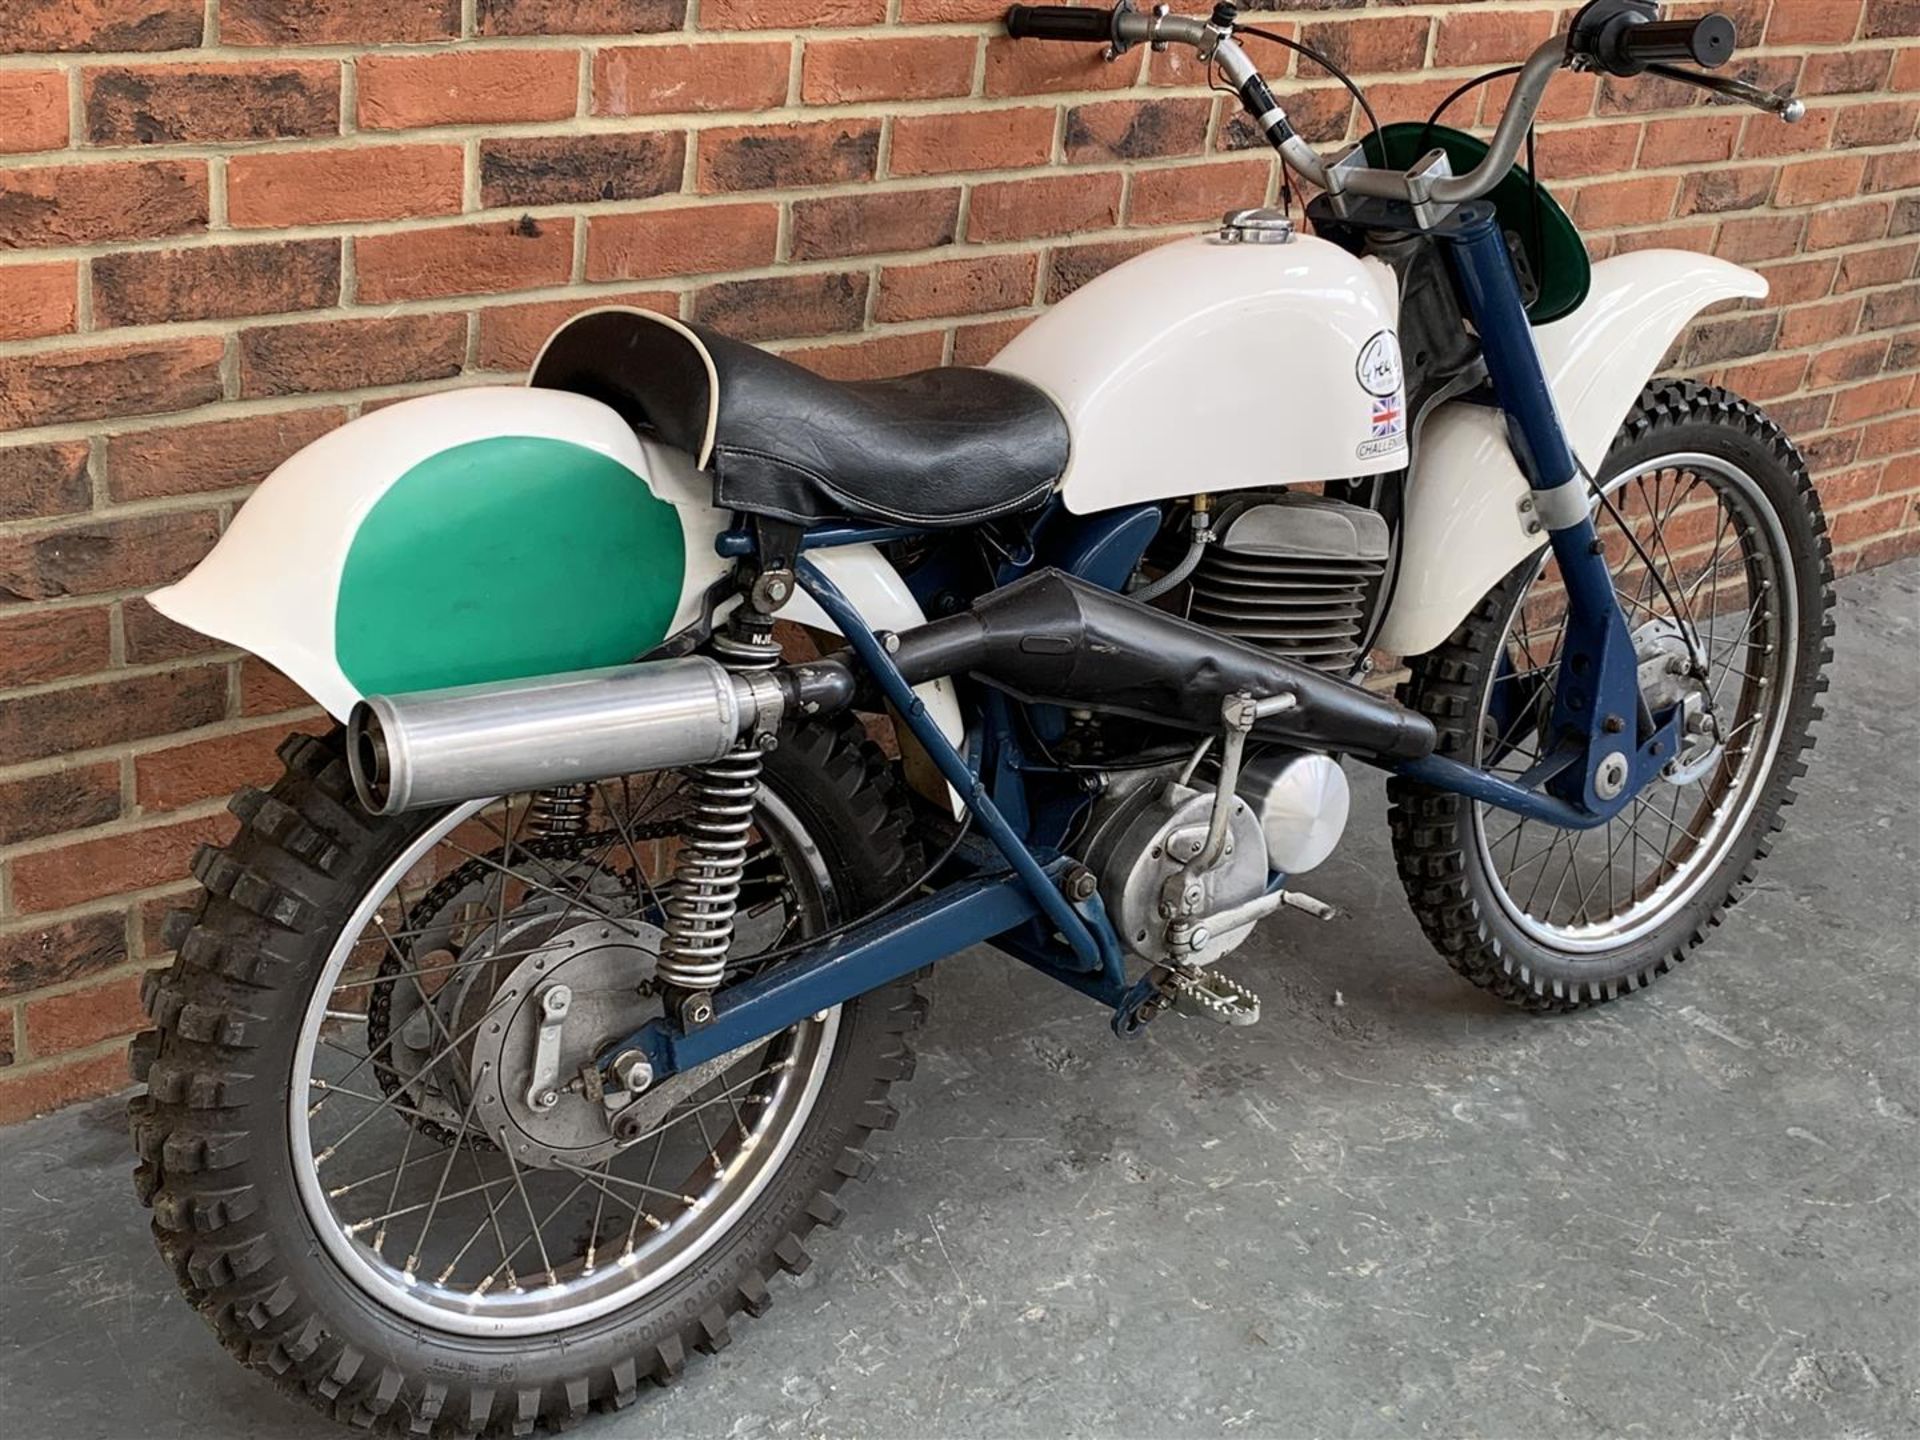 1965 Greeves Challenger 250cc - Image 9 of 13